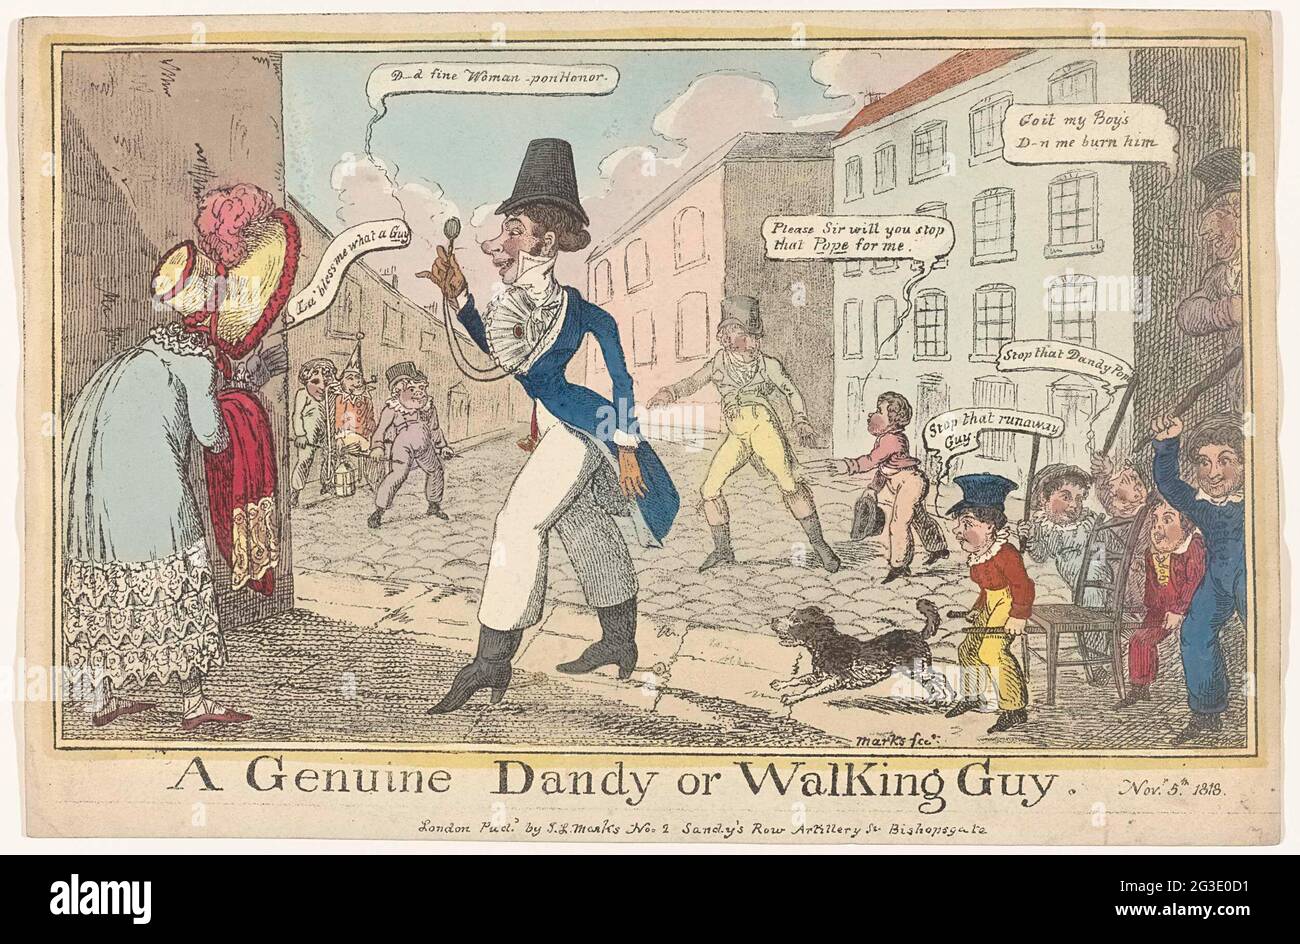 Cartoon on the Dandy at Guy Fawkes Day; A Genuine Dandy or Walking Guy.  Dandy, walking in a street, looking through his lorgnet. On the left a  woman with large canopy hat